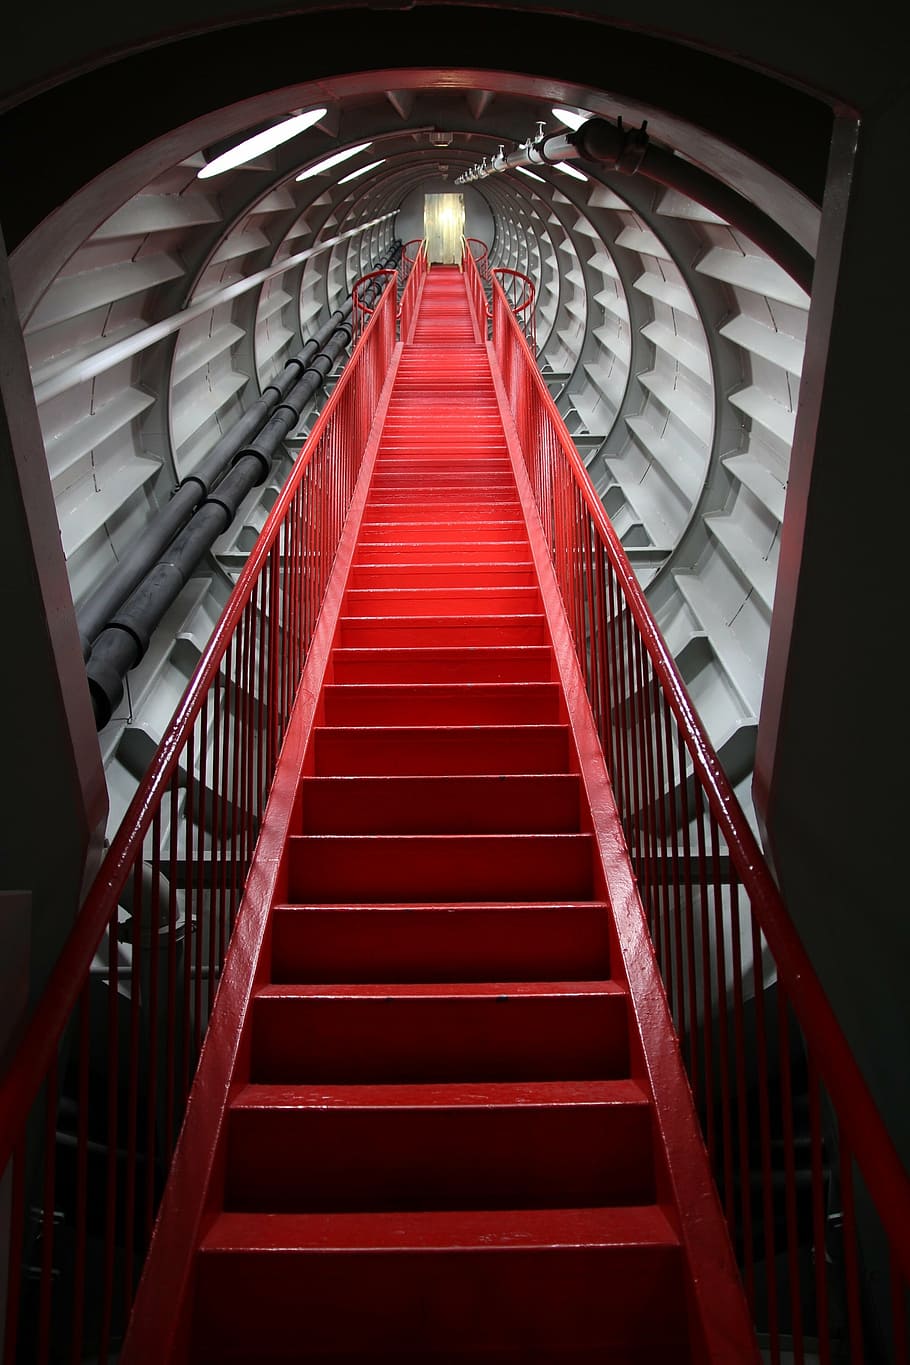 red metal staircase going upward, stairs, atomium, brussels, world's fair